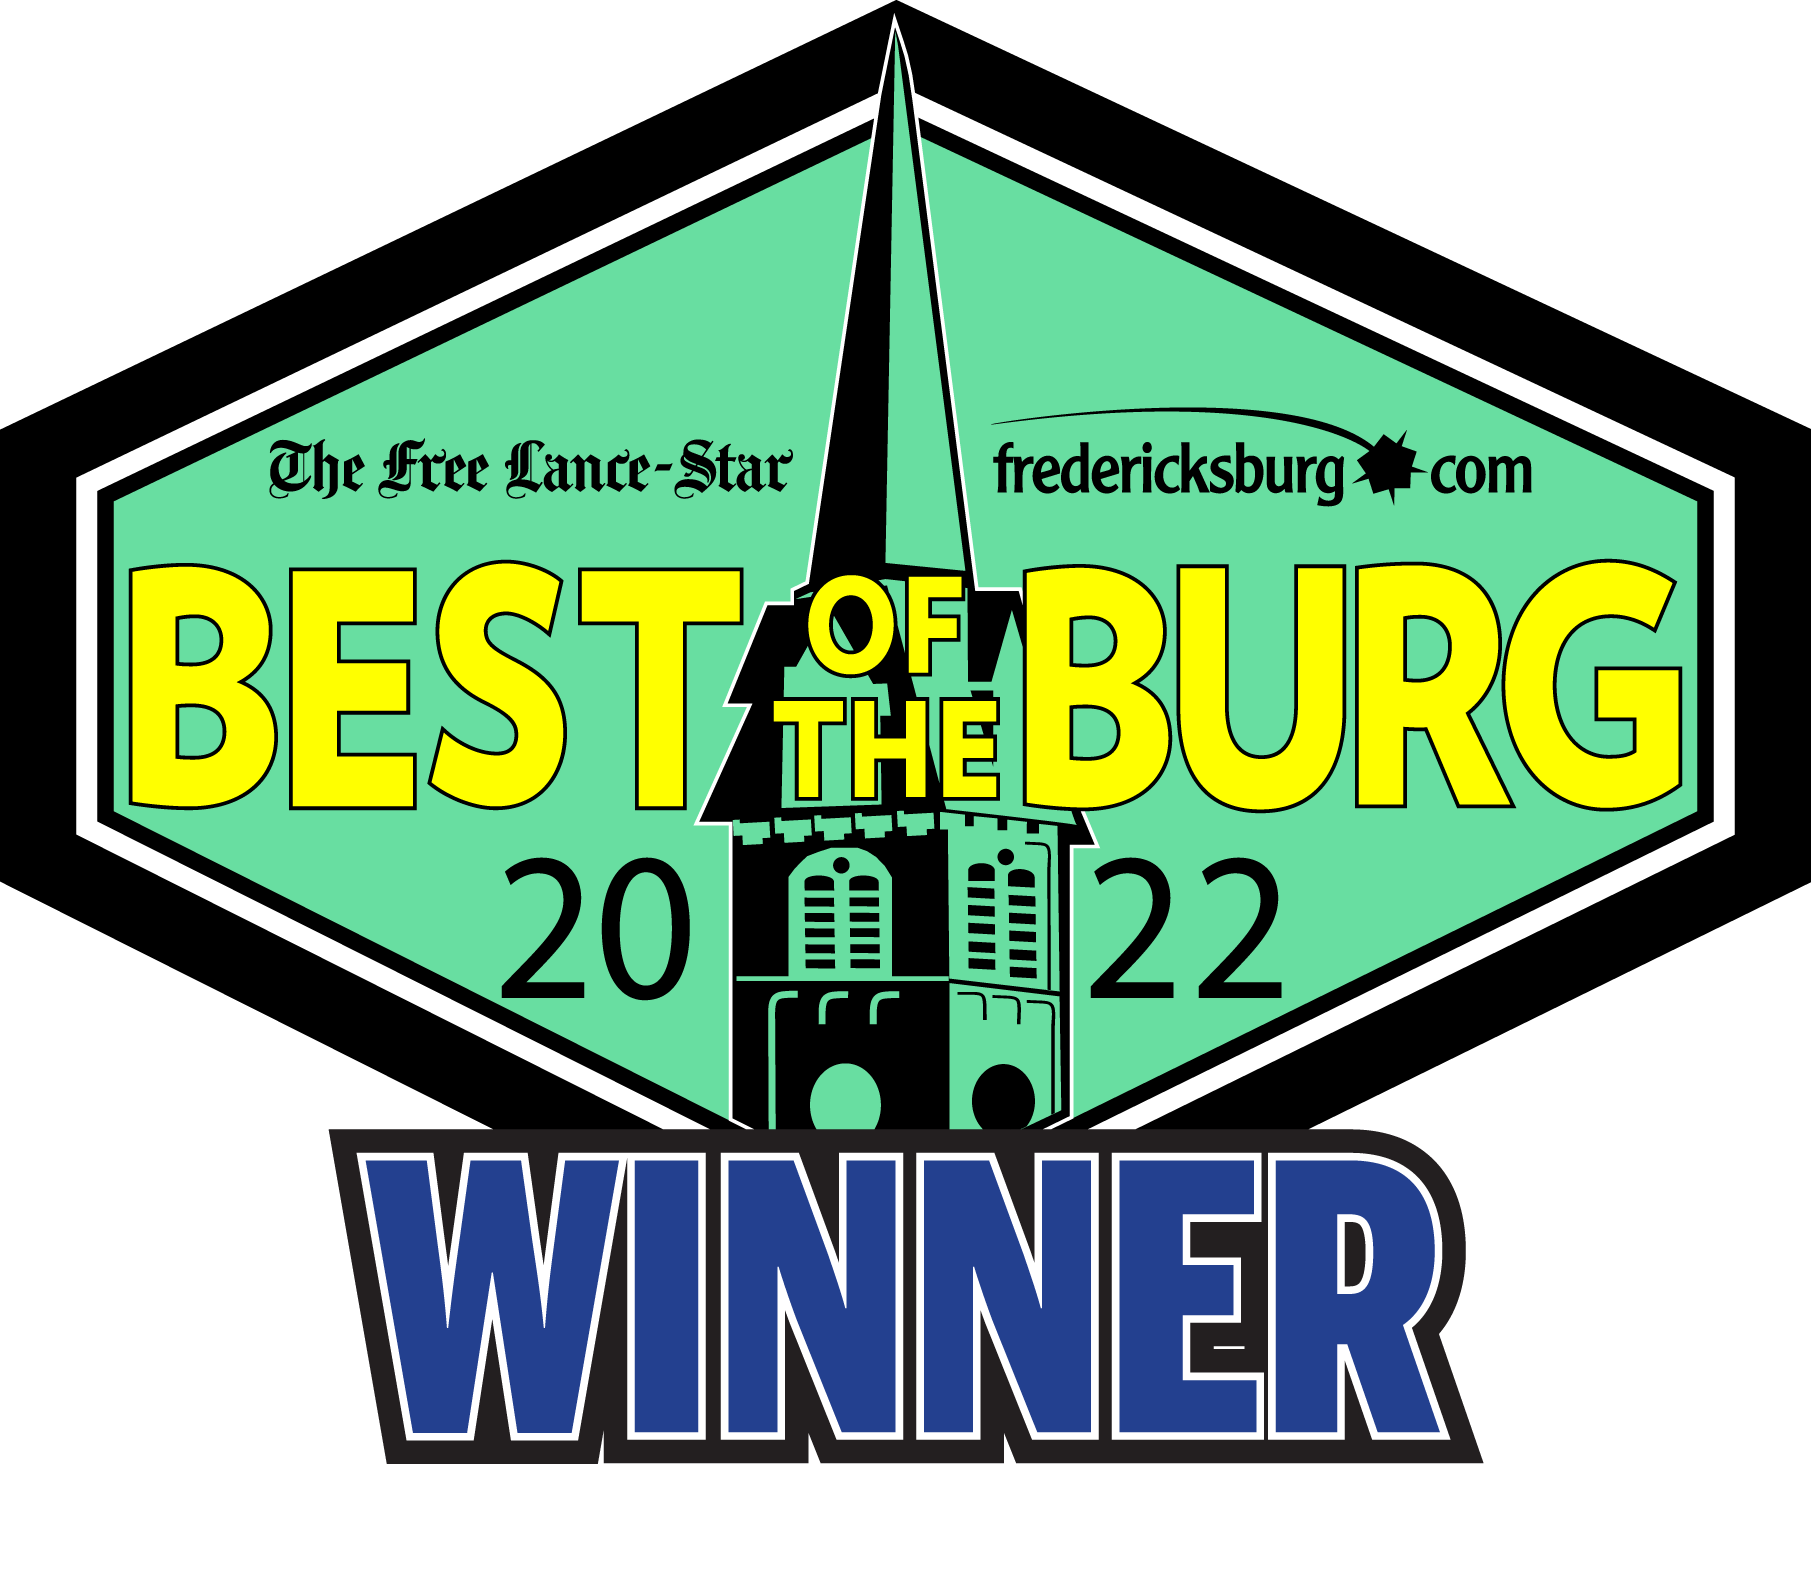 Best of the Burg 2019